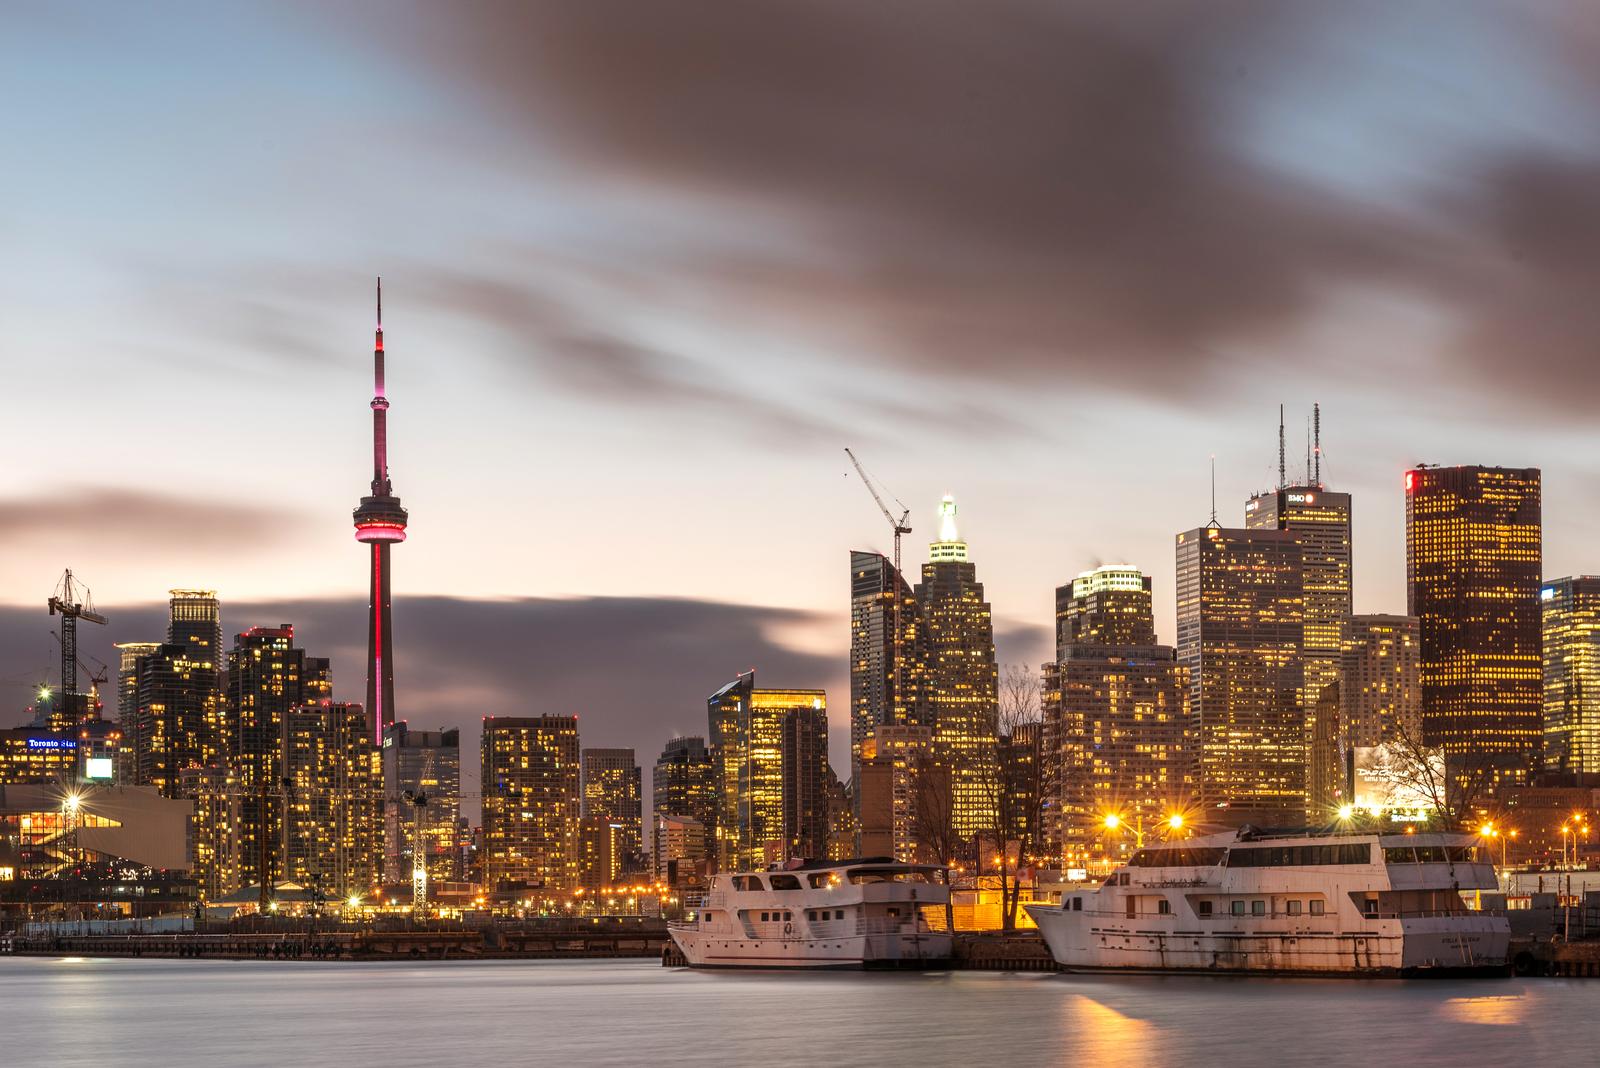 Name That City! Put Your Travel Knowledge to Test With This Picture Quiz! Toronto, Ontario, Canada